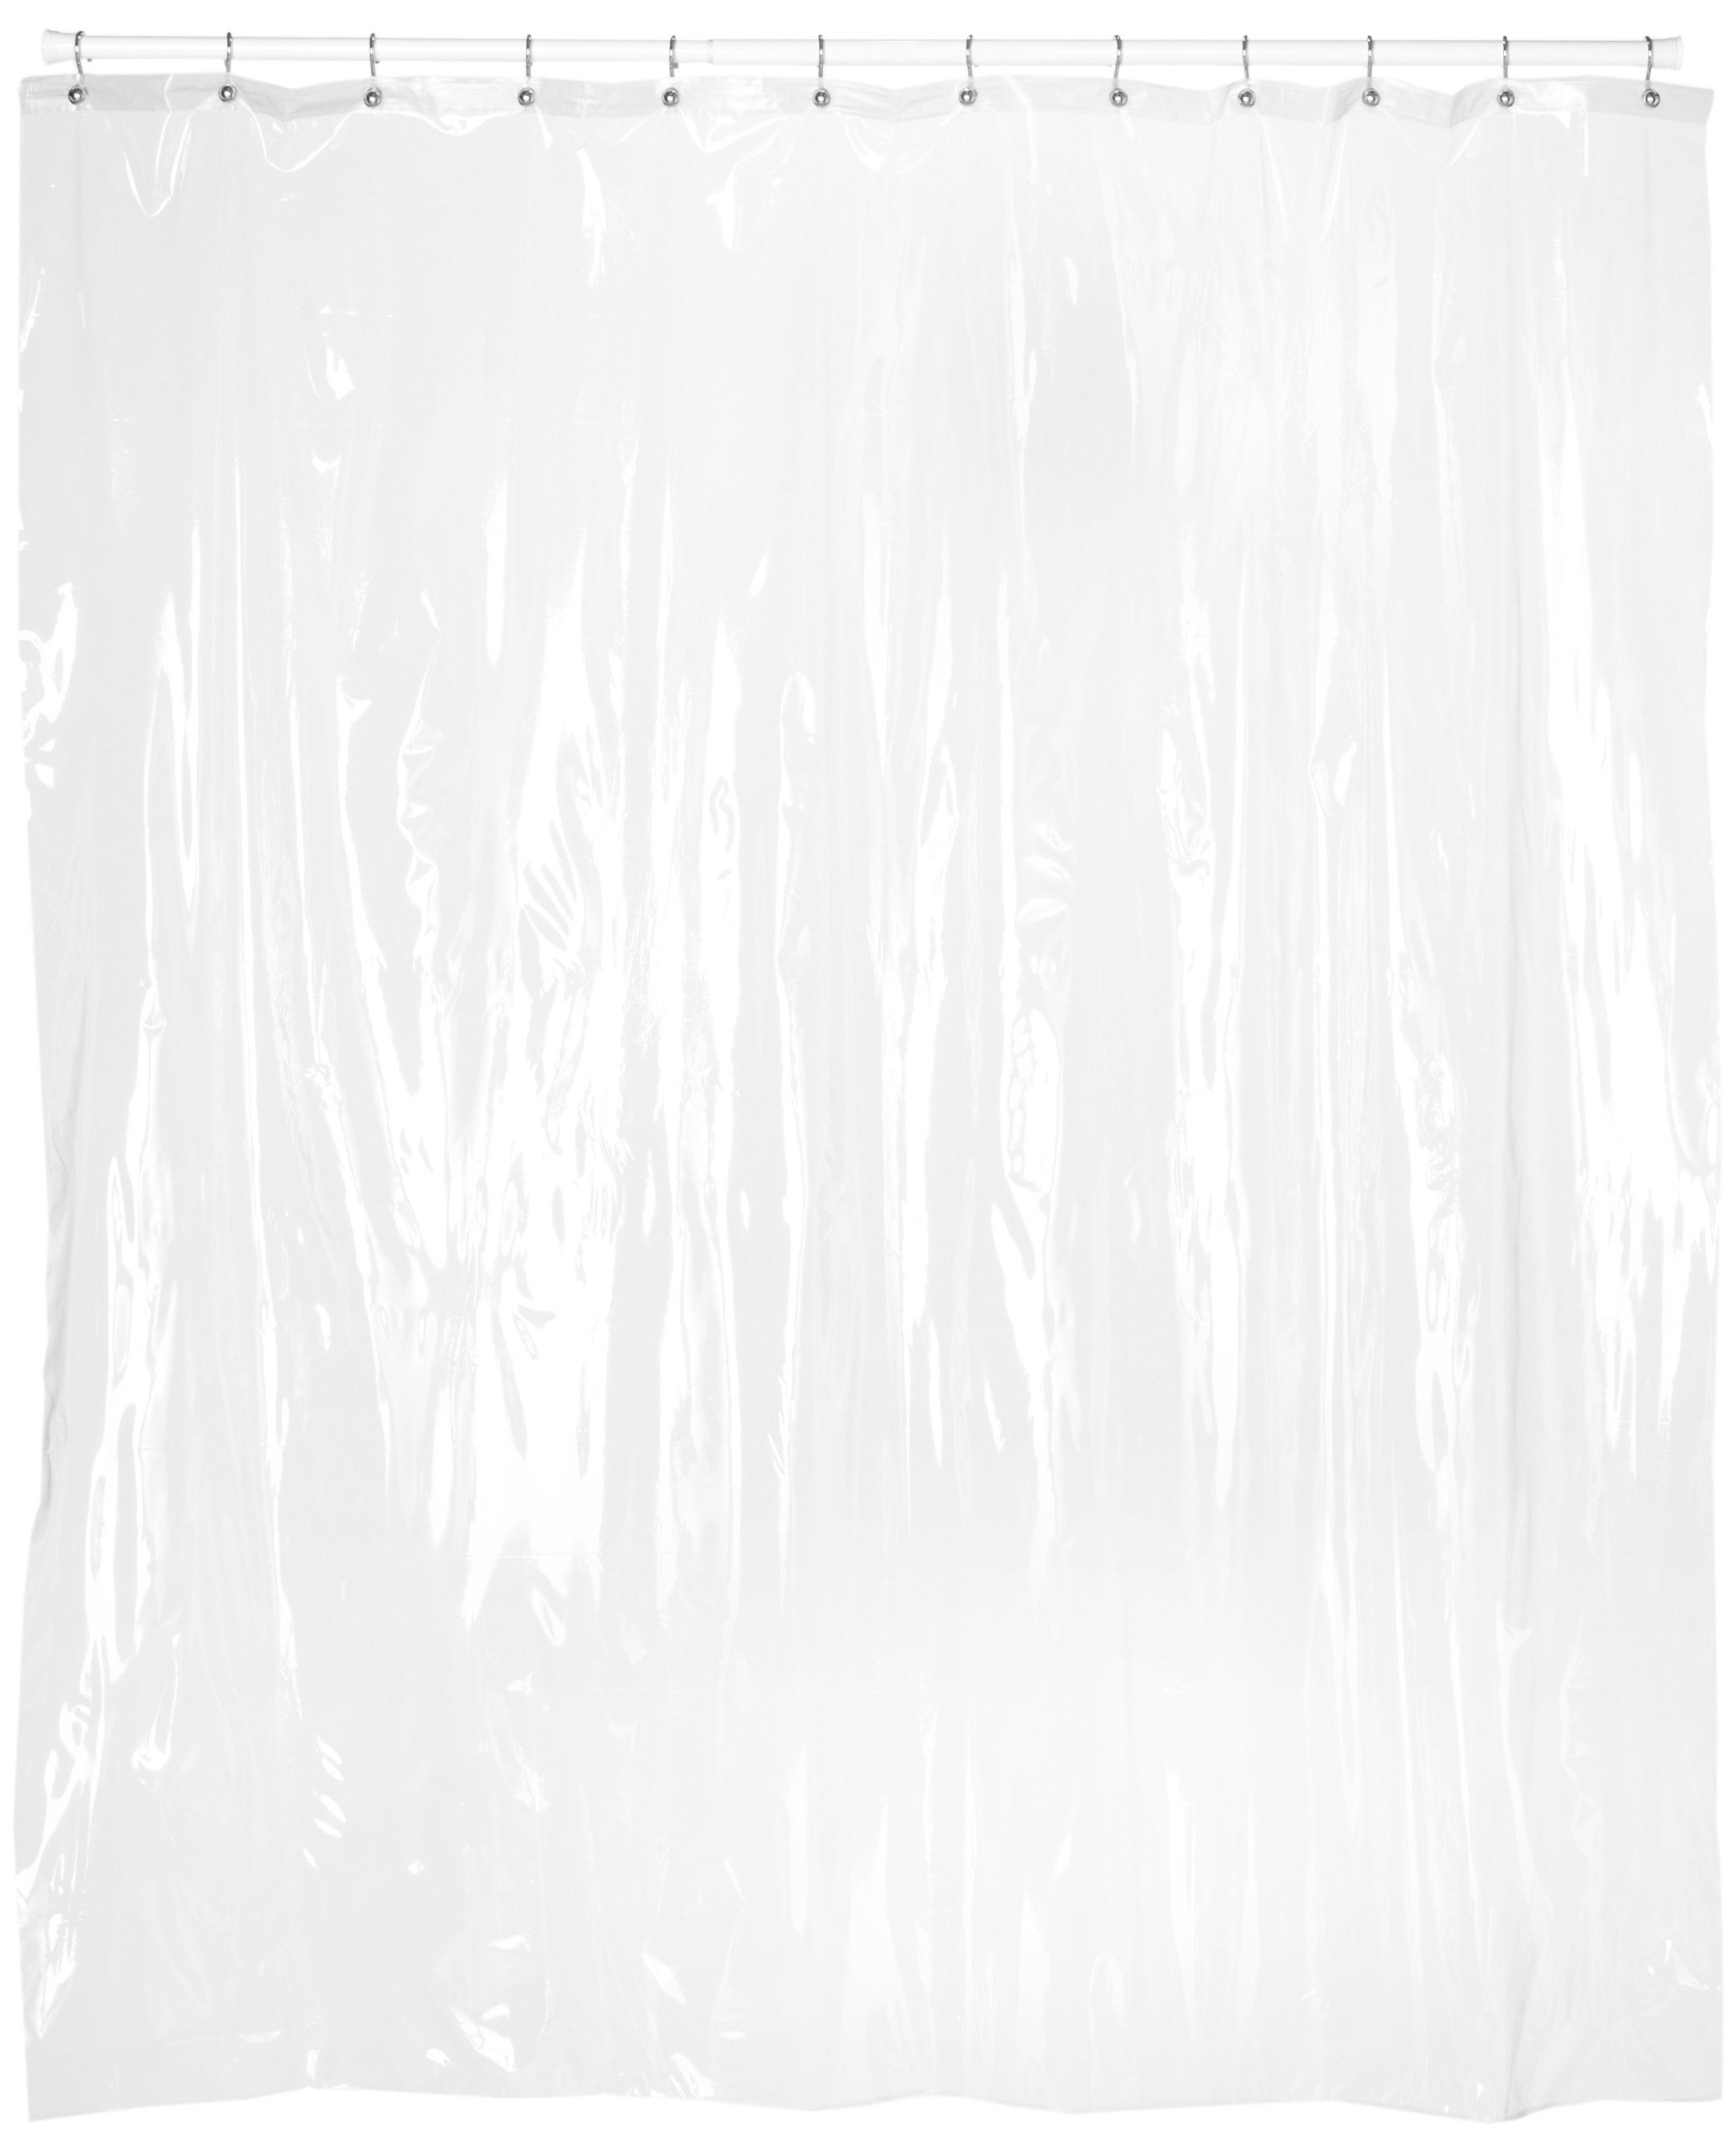 Odd Size Extra Long Vinyl Bathroom Shower Curtain Liner 72×78034 Pertaining To Odd Shower Curtains (View 13 of 25)